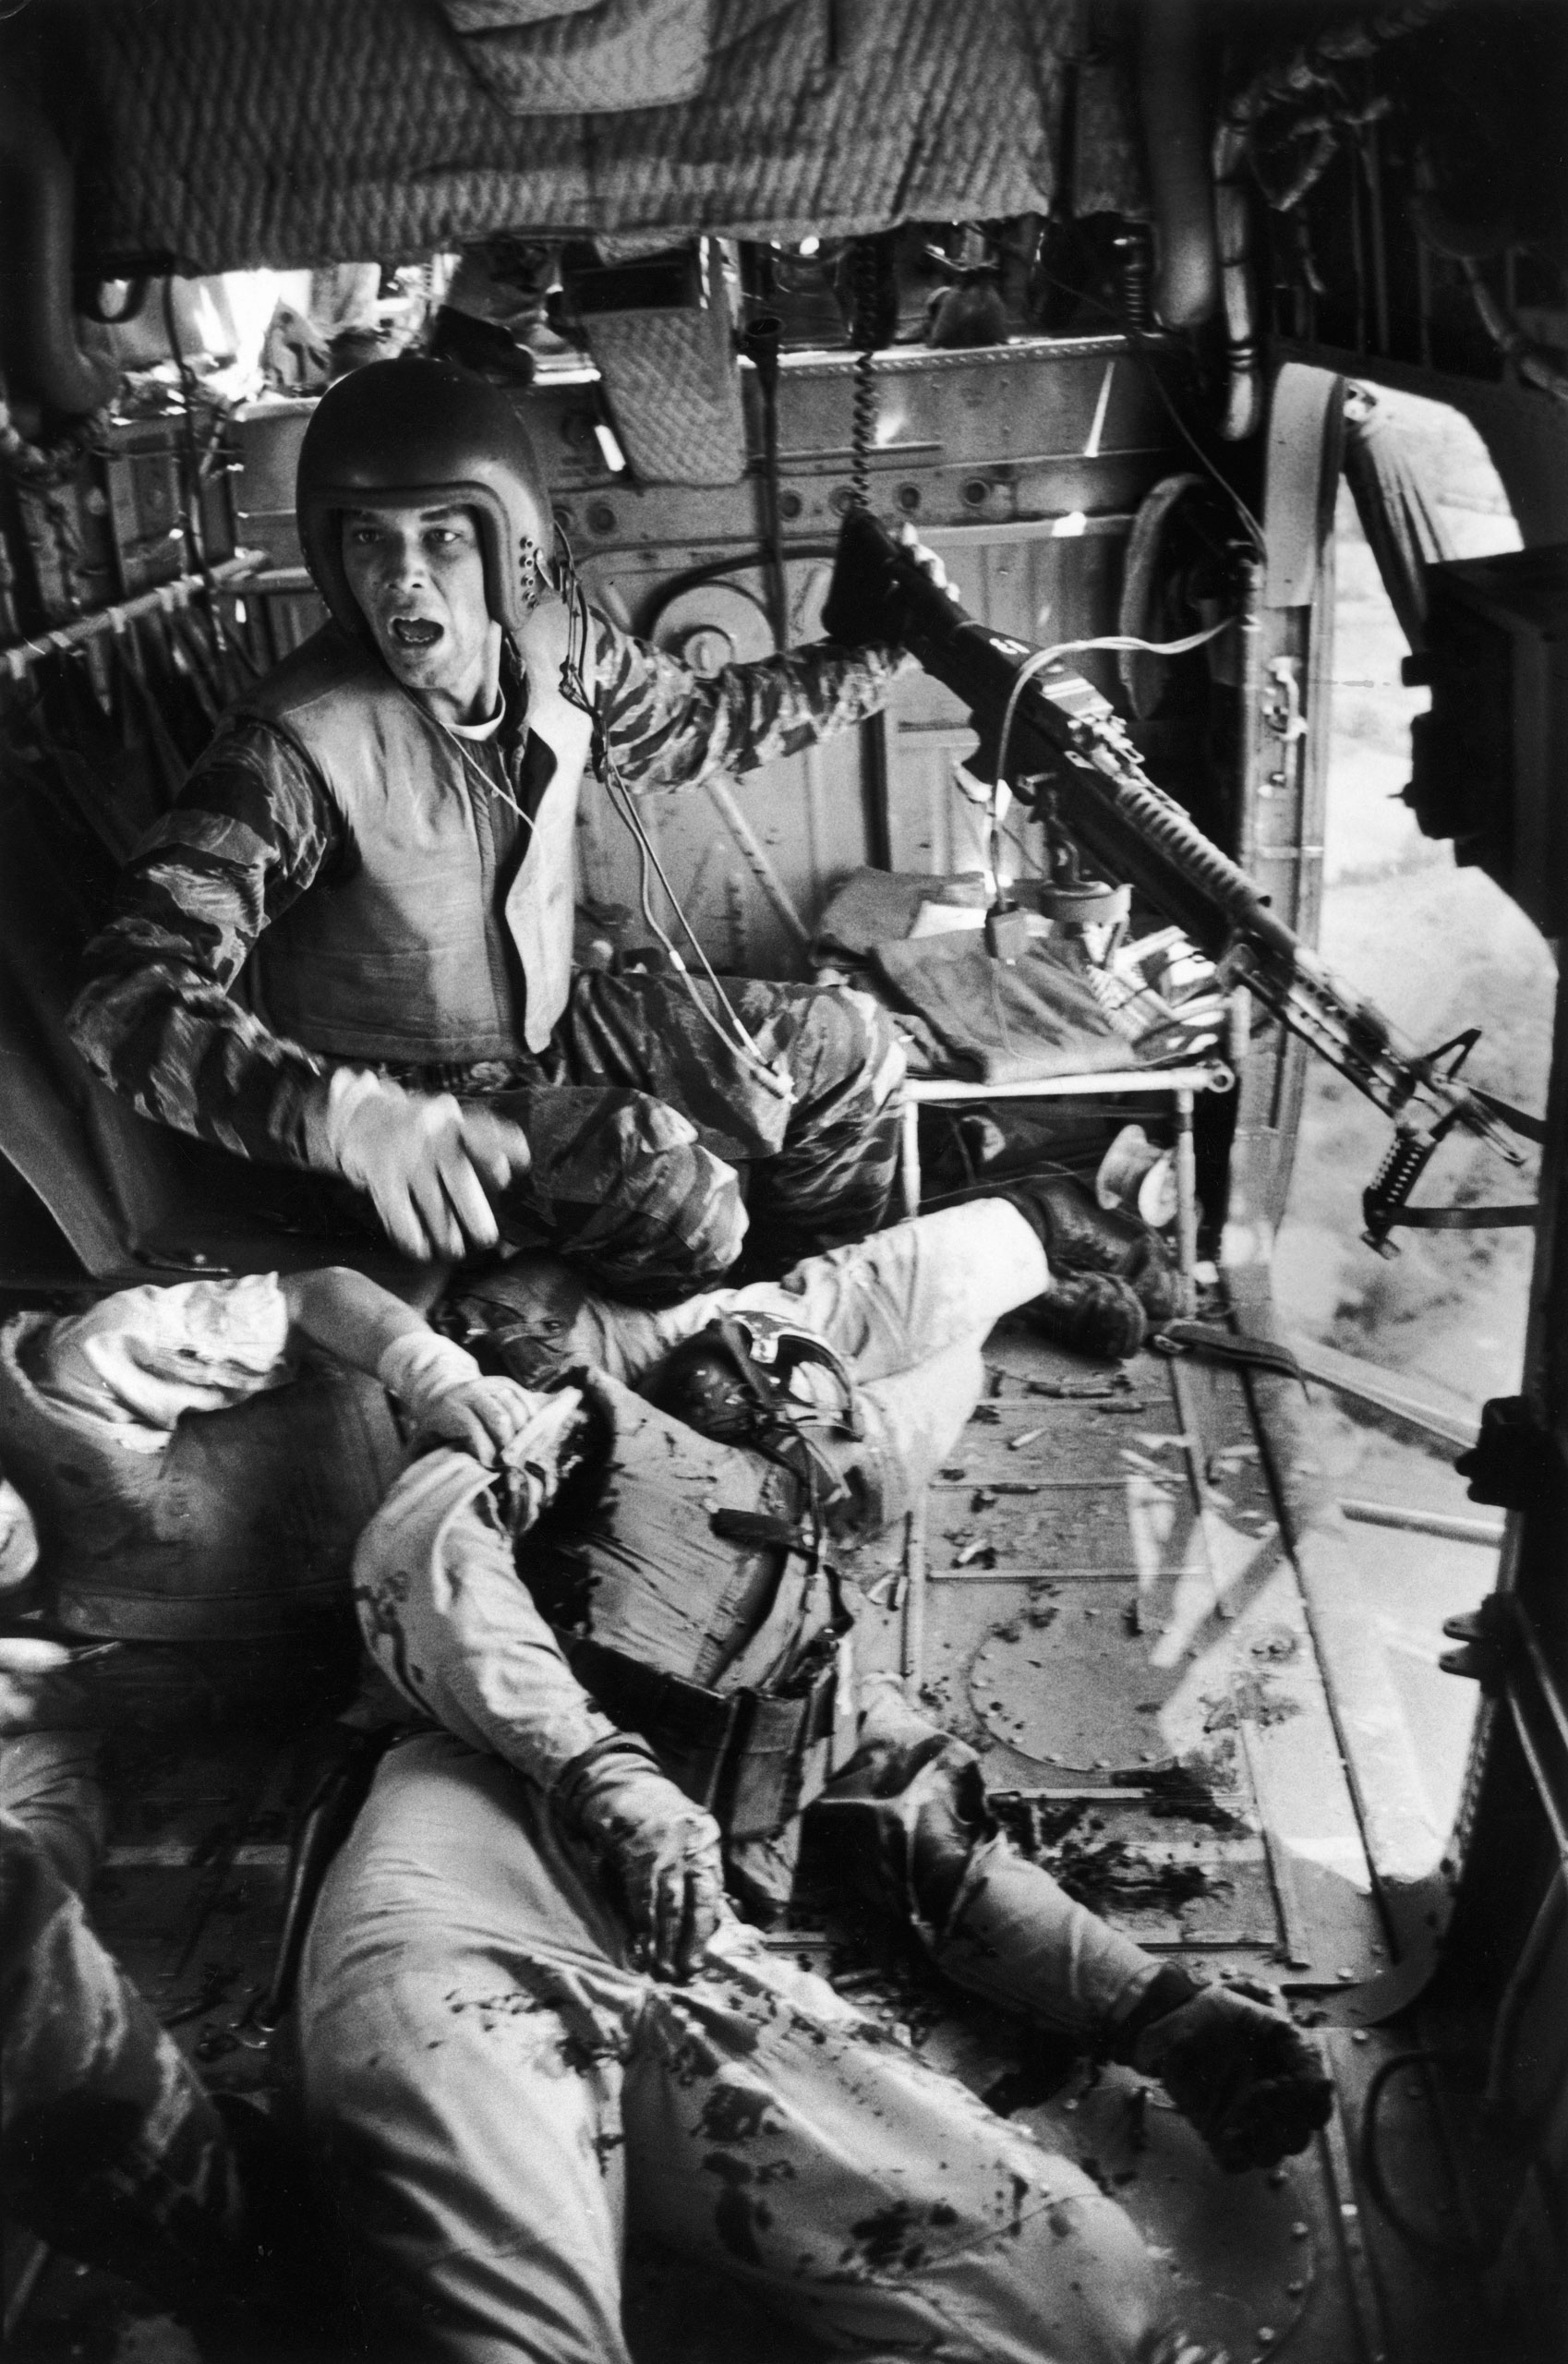 A mortally wounded comrade at his feet, Lance Cpl. James C. Farley, helicopter crew chief, yells to his pilot after a firefight in Vietnam, 1965.